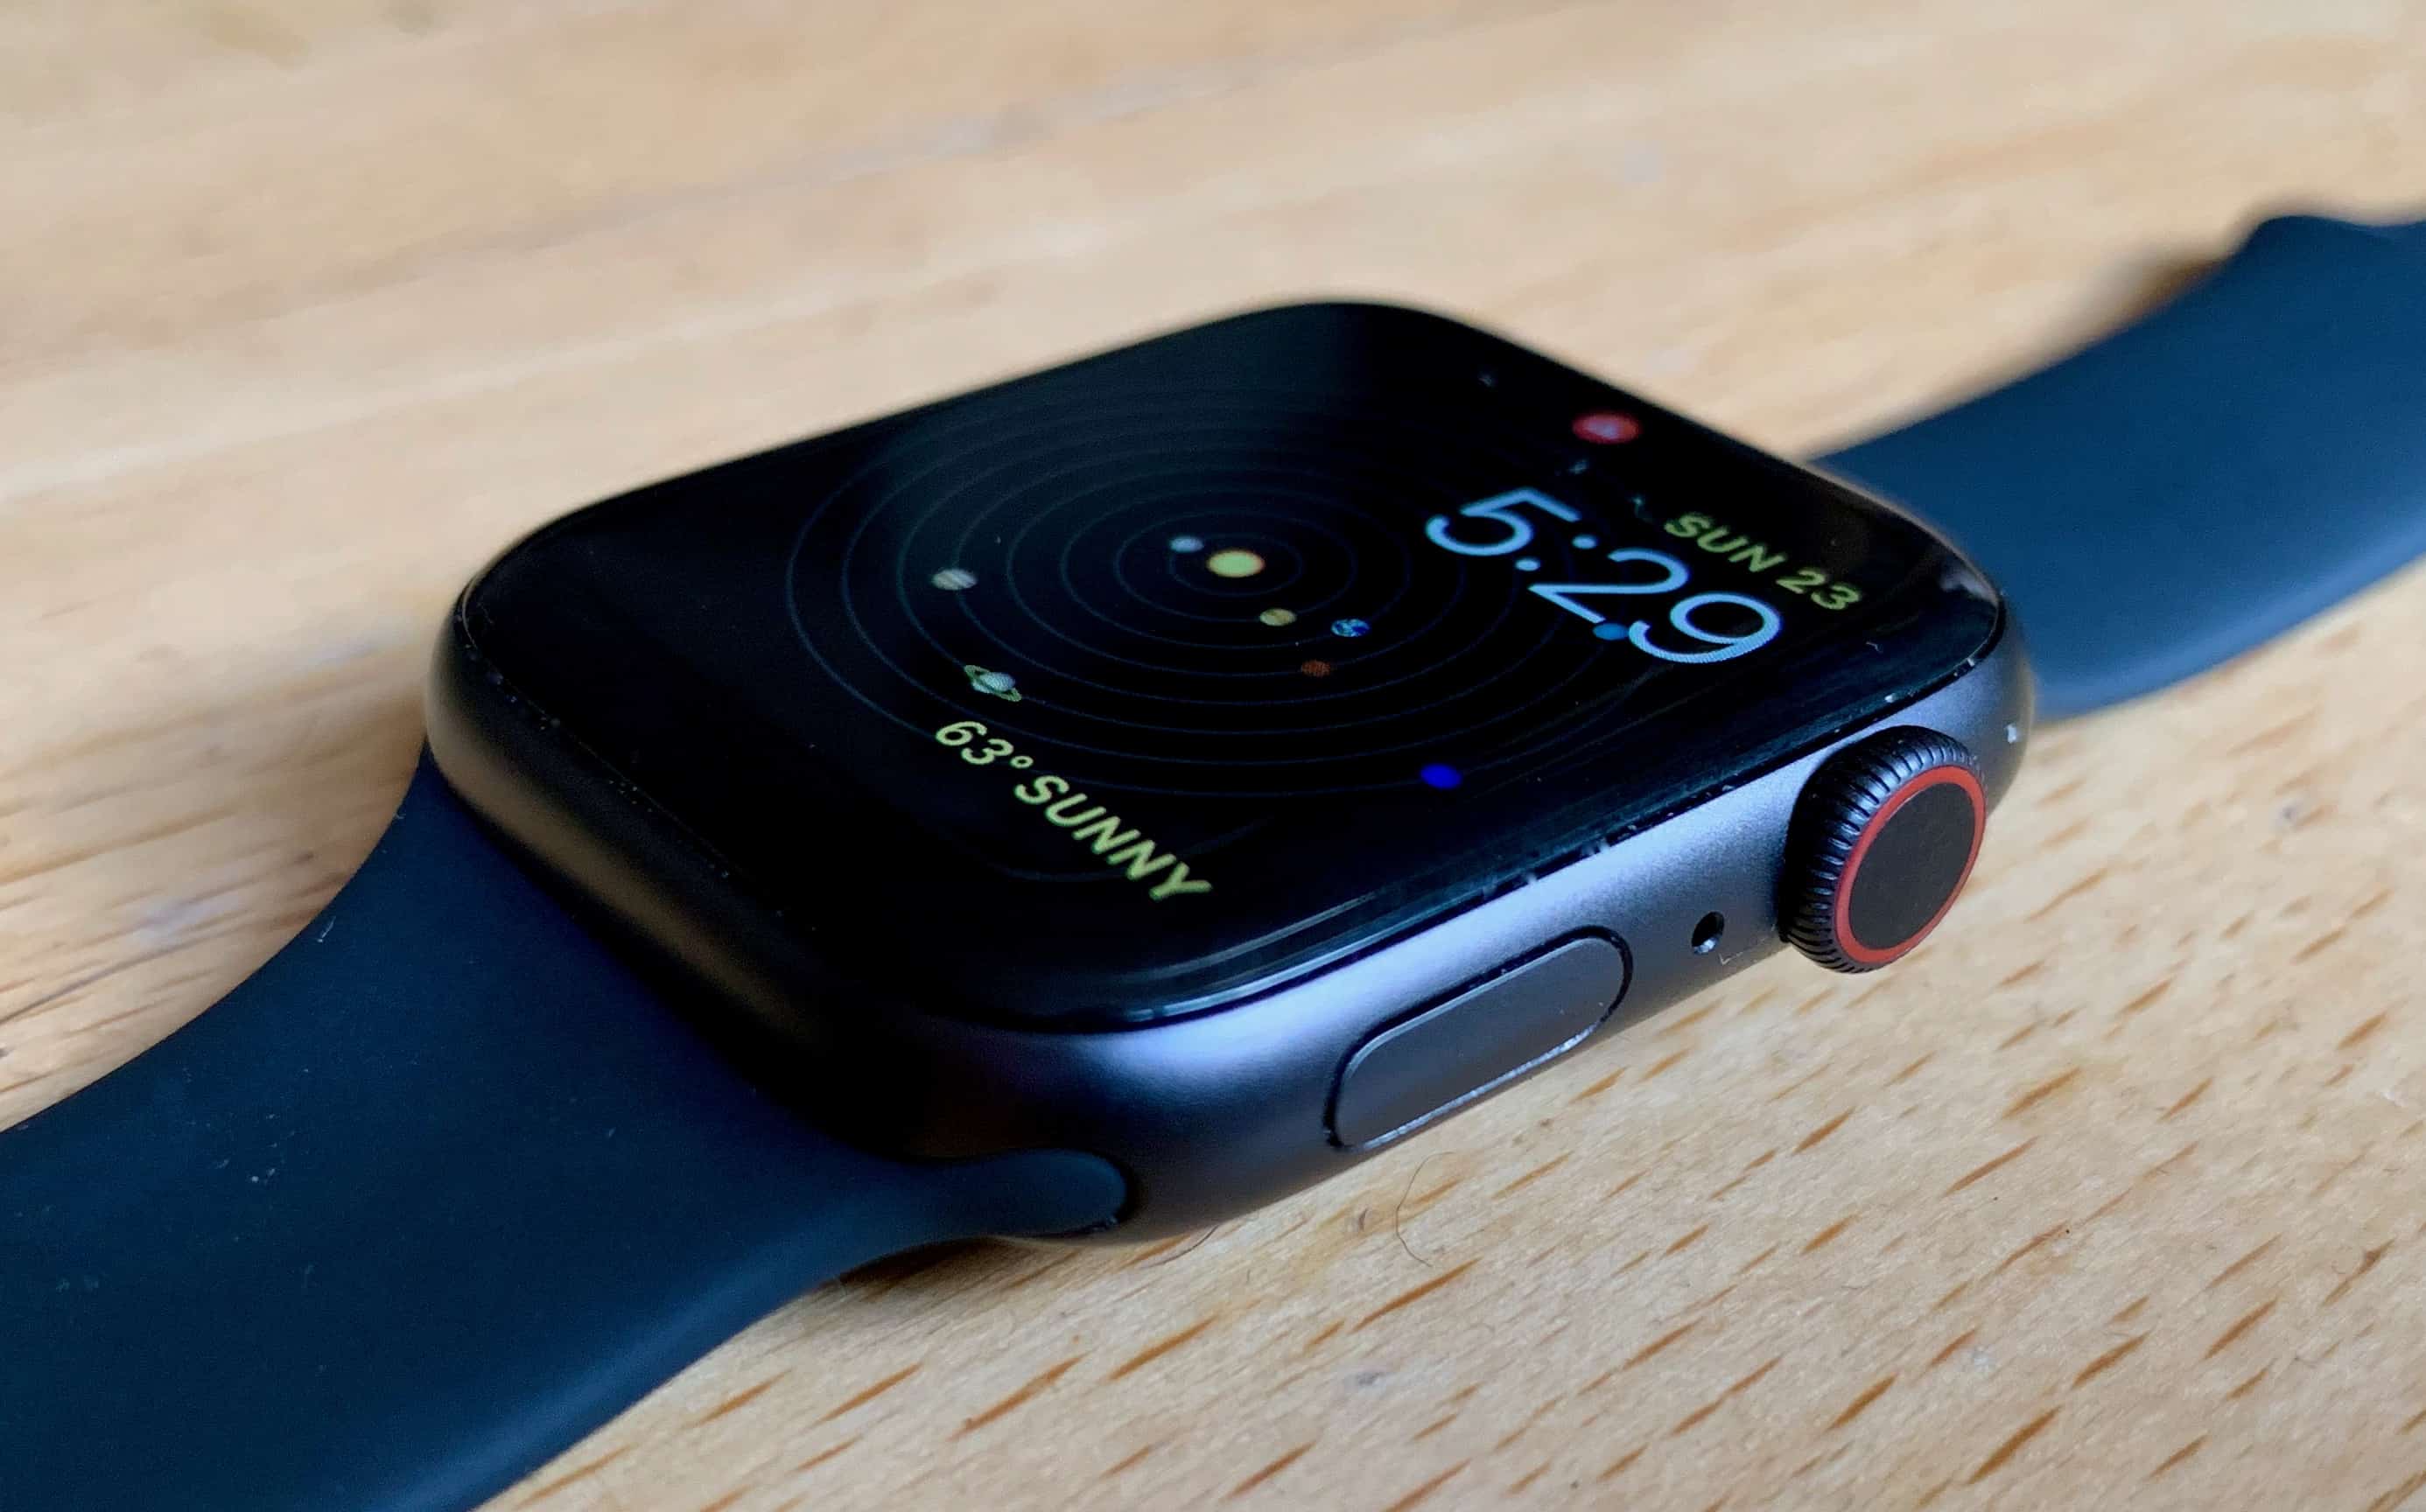 The lower side button on Apple Watch Series 4 sits flush with the body